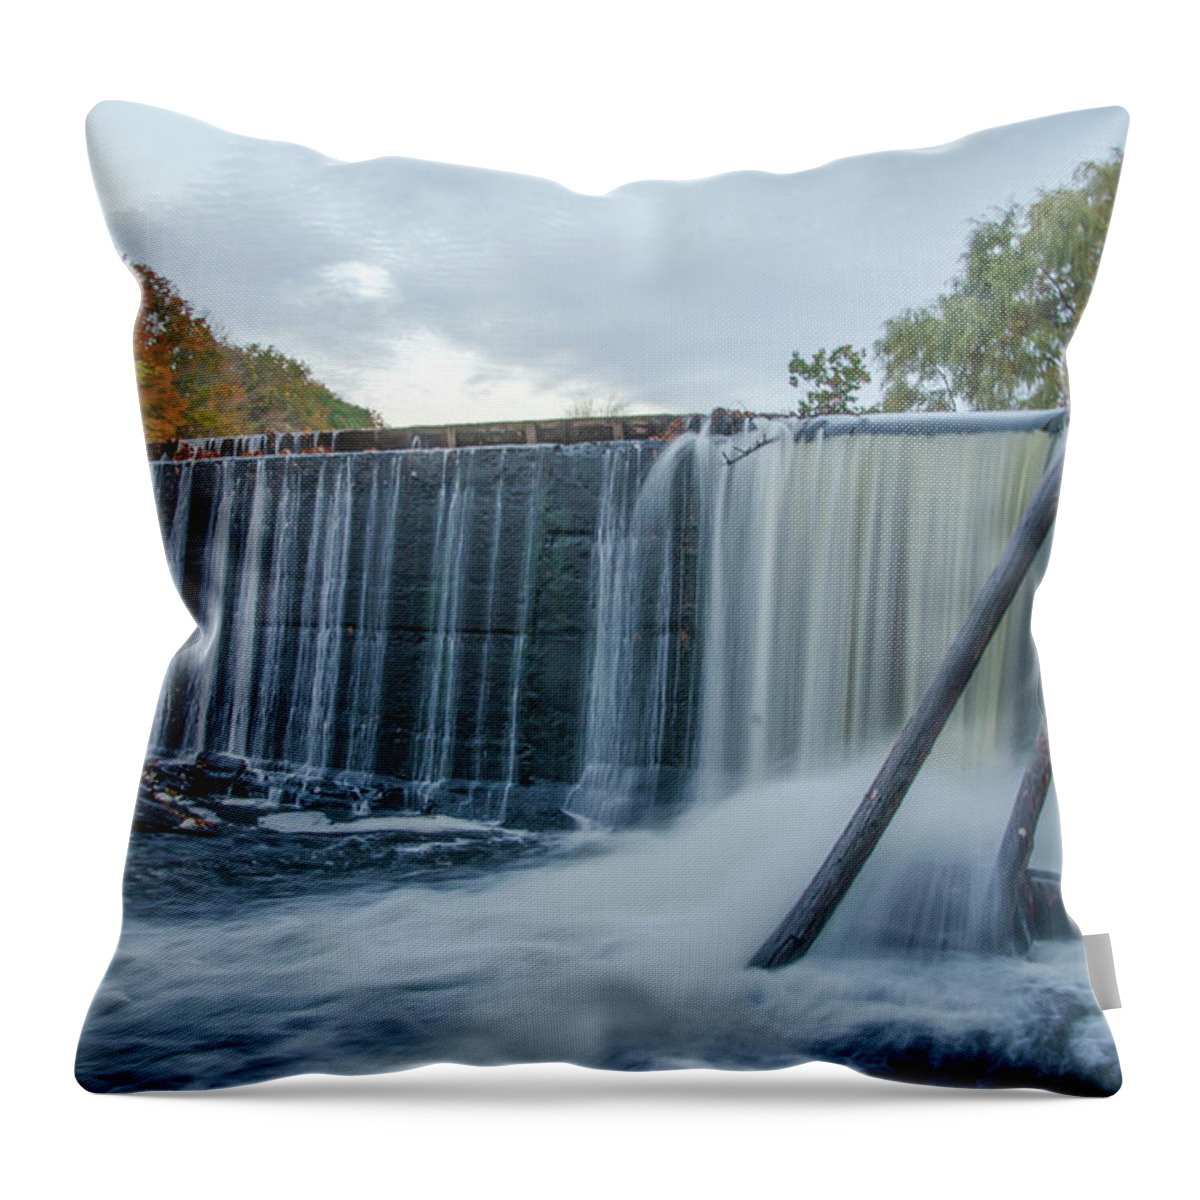 Mousam Throw Pillow featuring the photograph Kennebunk Maine - Mousam River Dam by Bill Cannon